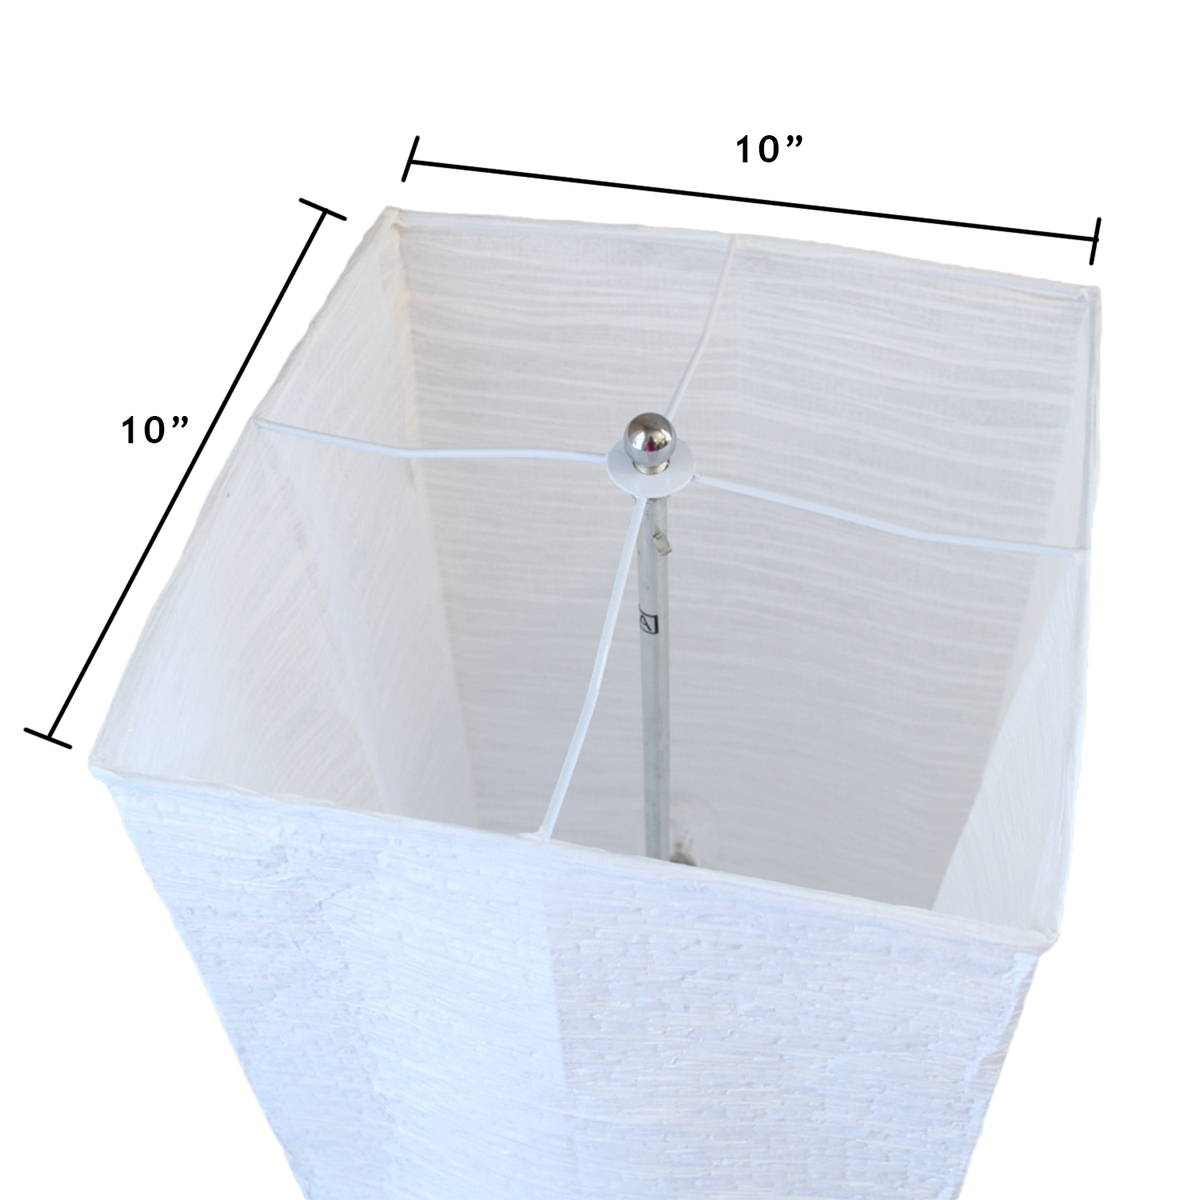 4-FT Hako Crepe Paper Lantern Floor Lamp Shade, 10-inch x 48-inch (SHADE + FRAME ONLY)